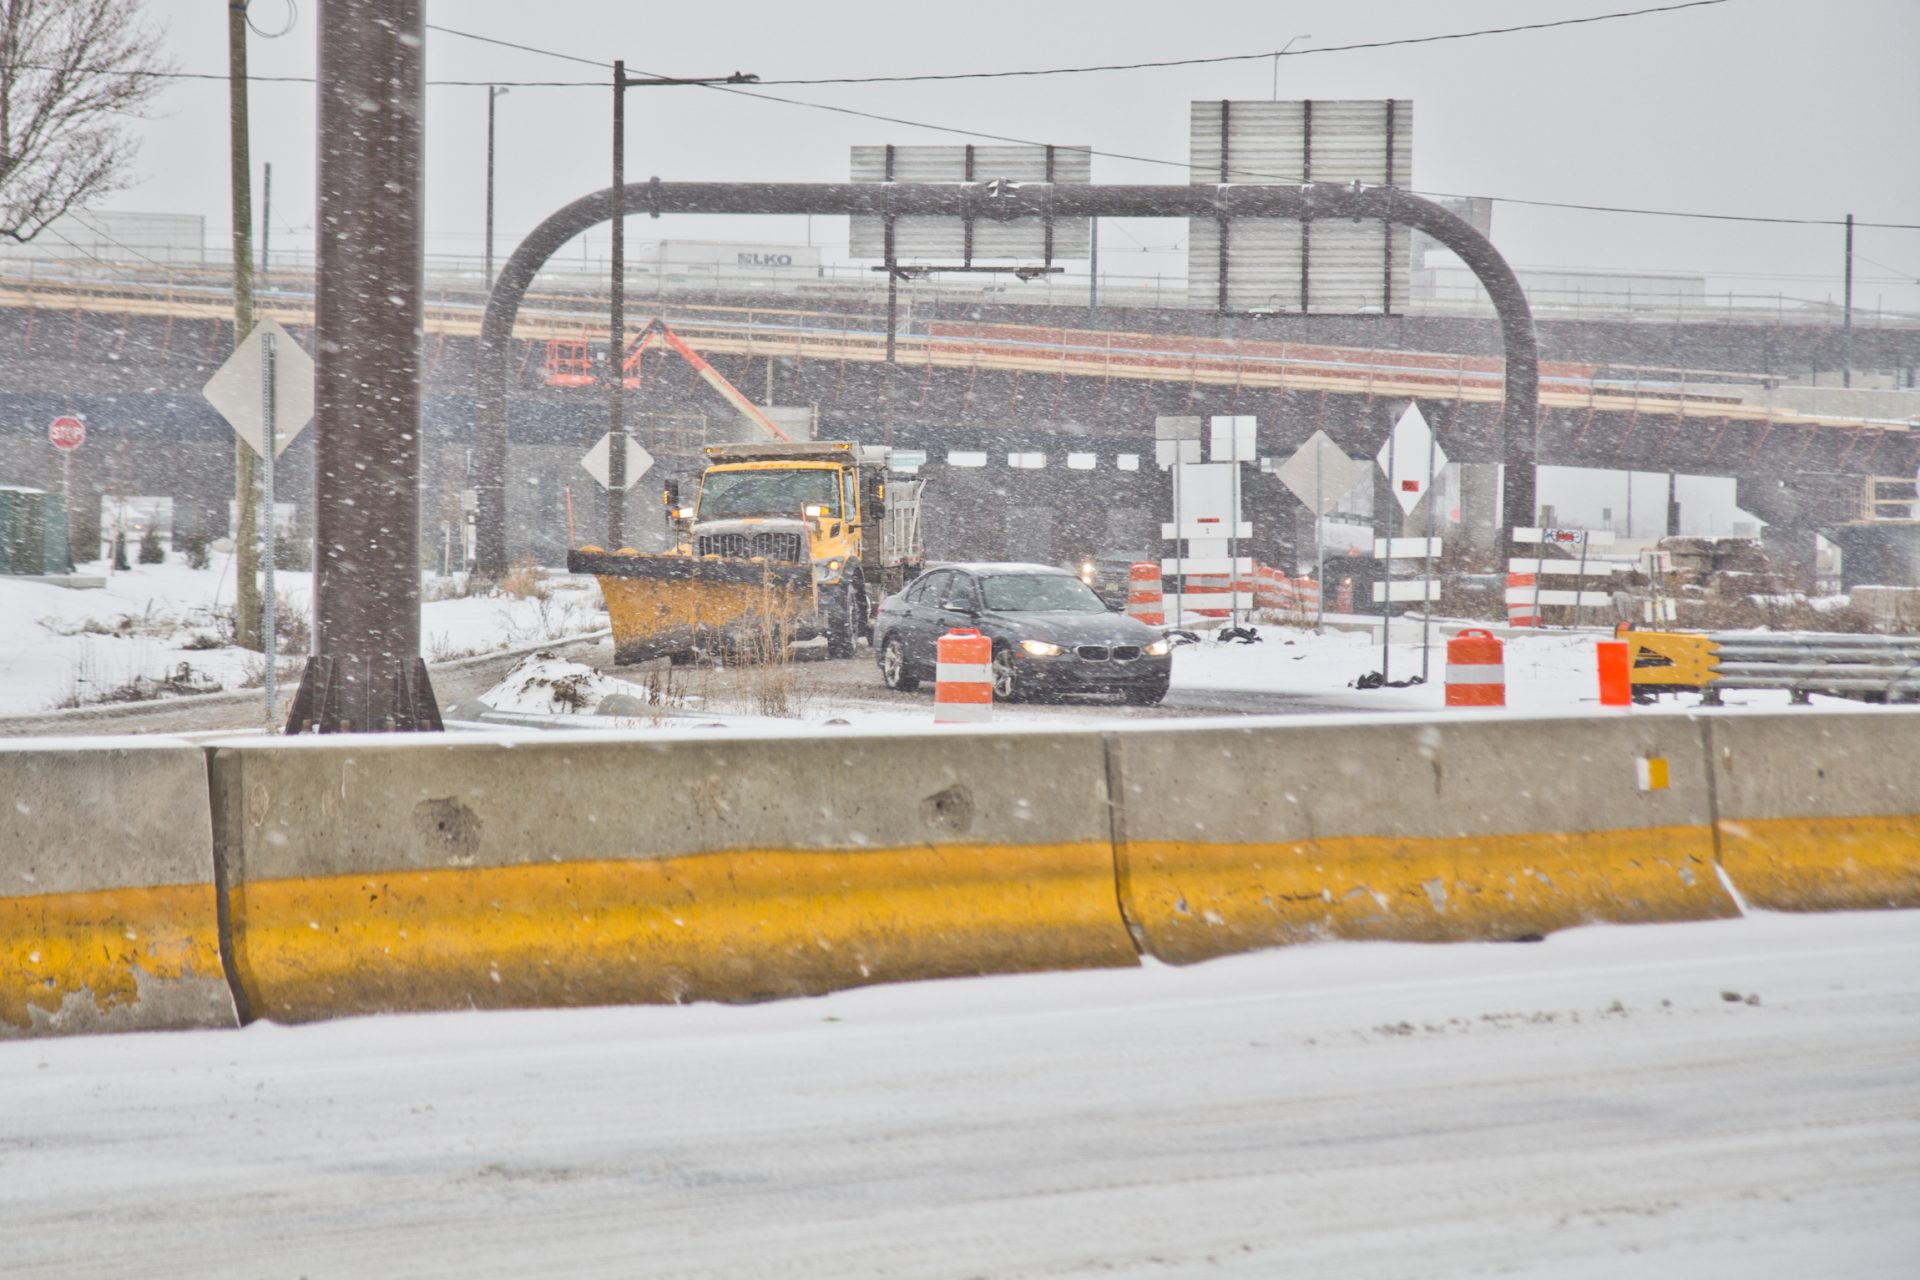 A PennDOT vehicle plows the entrance to 95 North in Philadelphia during a storm on Feb. 18, 2021.